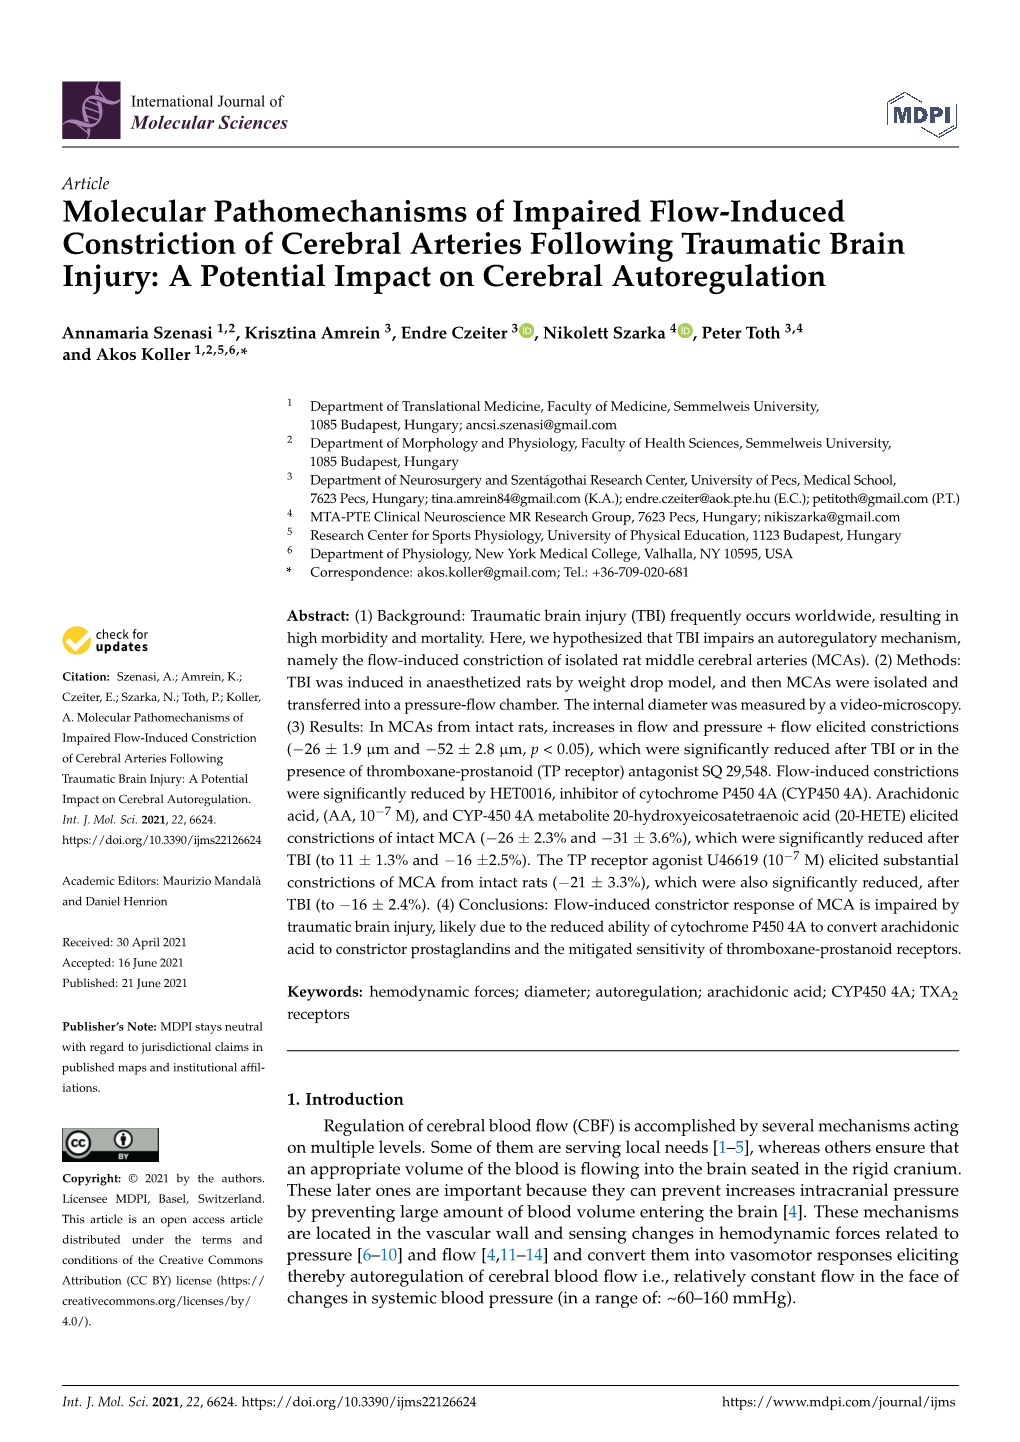 Molecular Pathomechanisms of Impaired Flow-Induced Constriction of Cerebral Arteries Following Traumatic Brain Injury: a Potential Impact on Cerebral Autoregulation